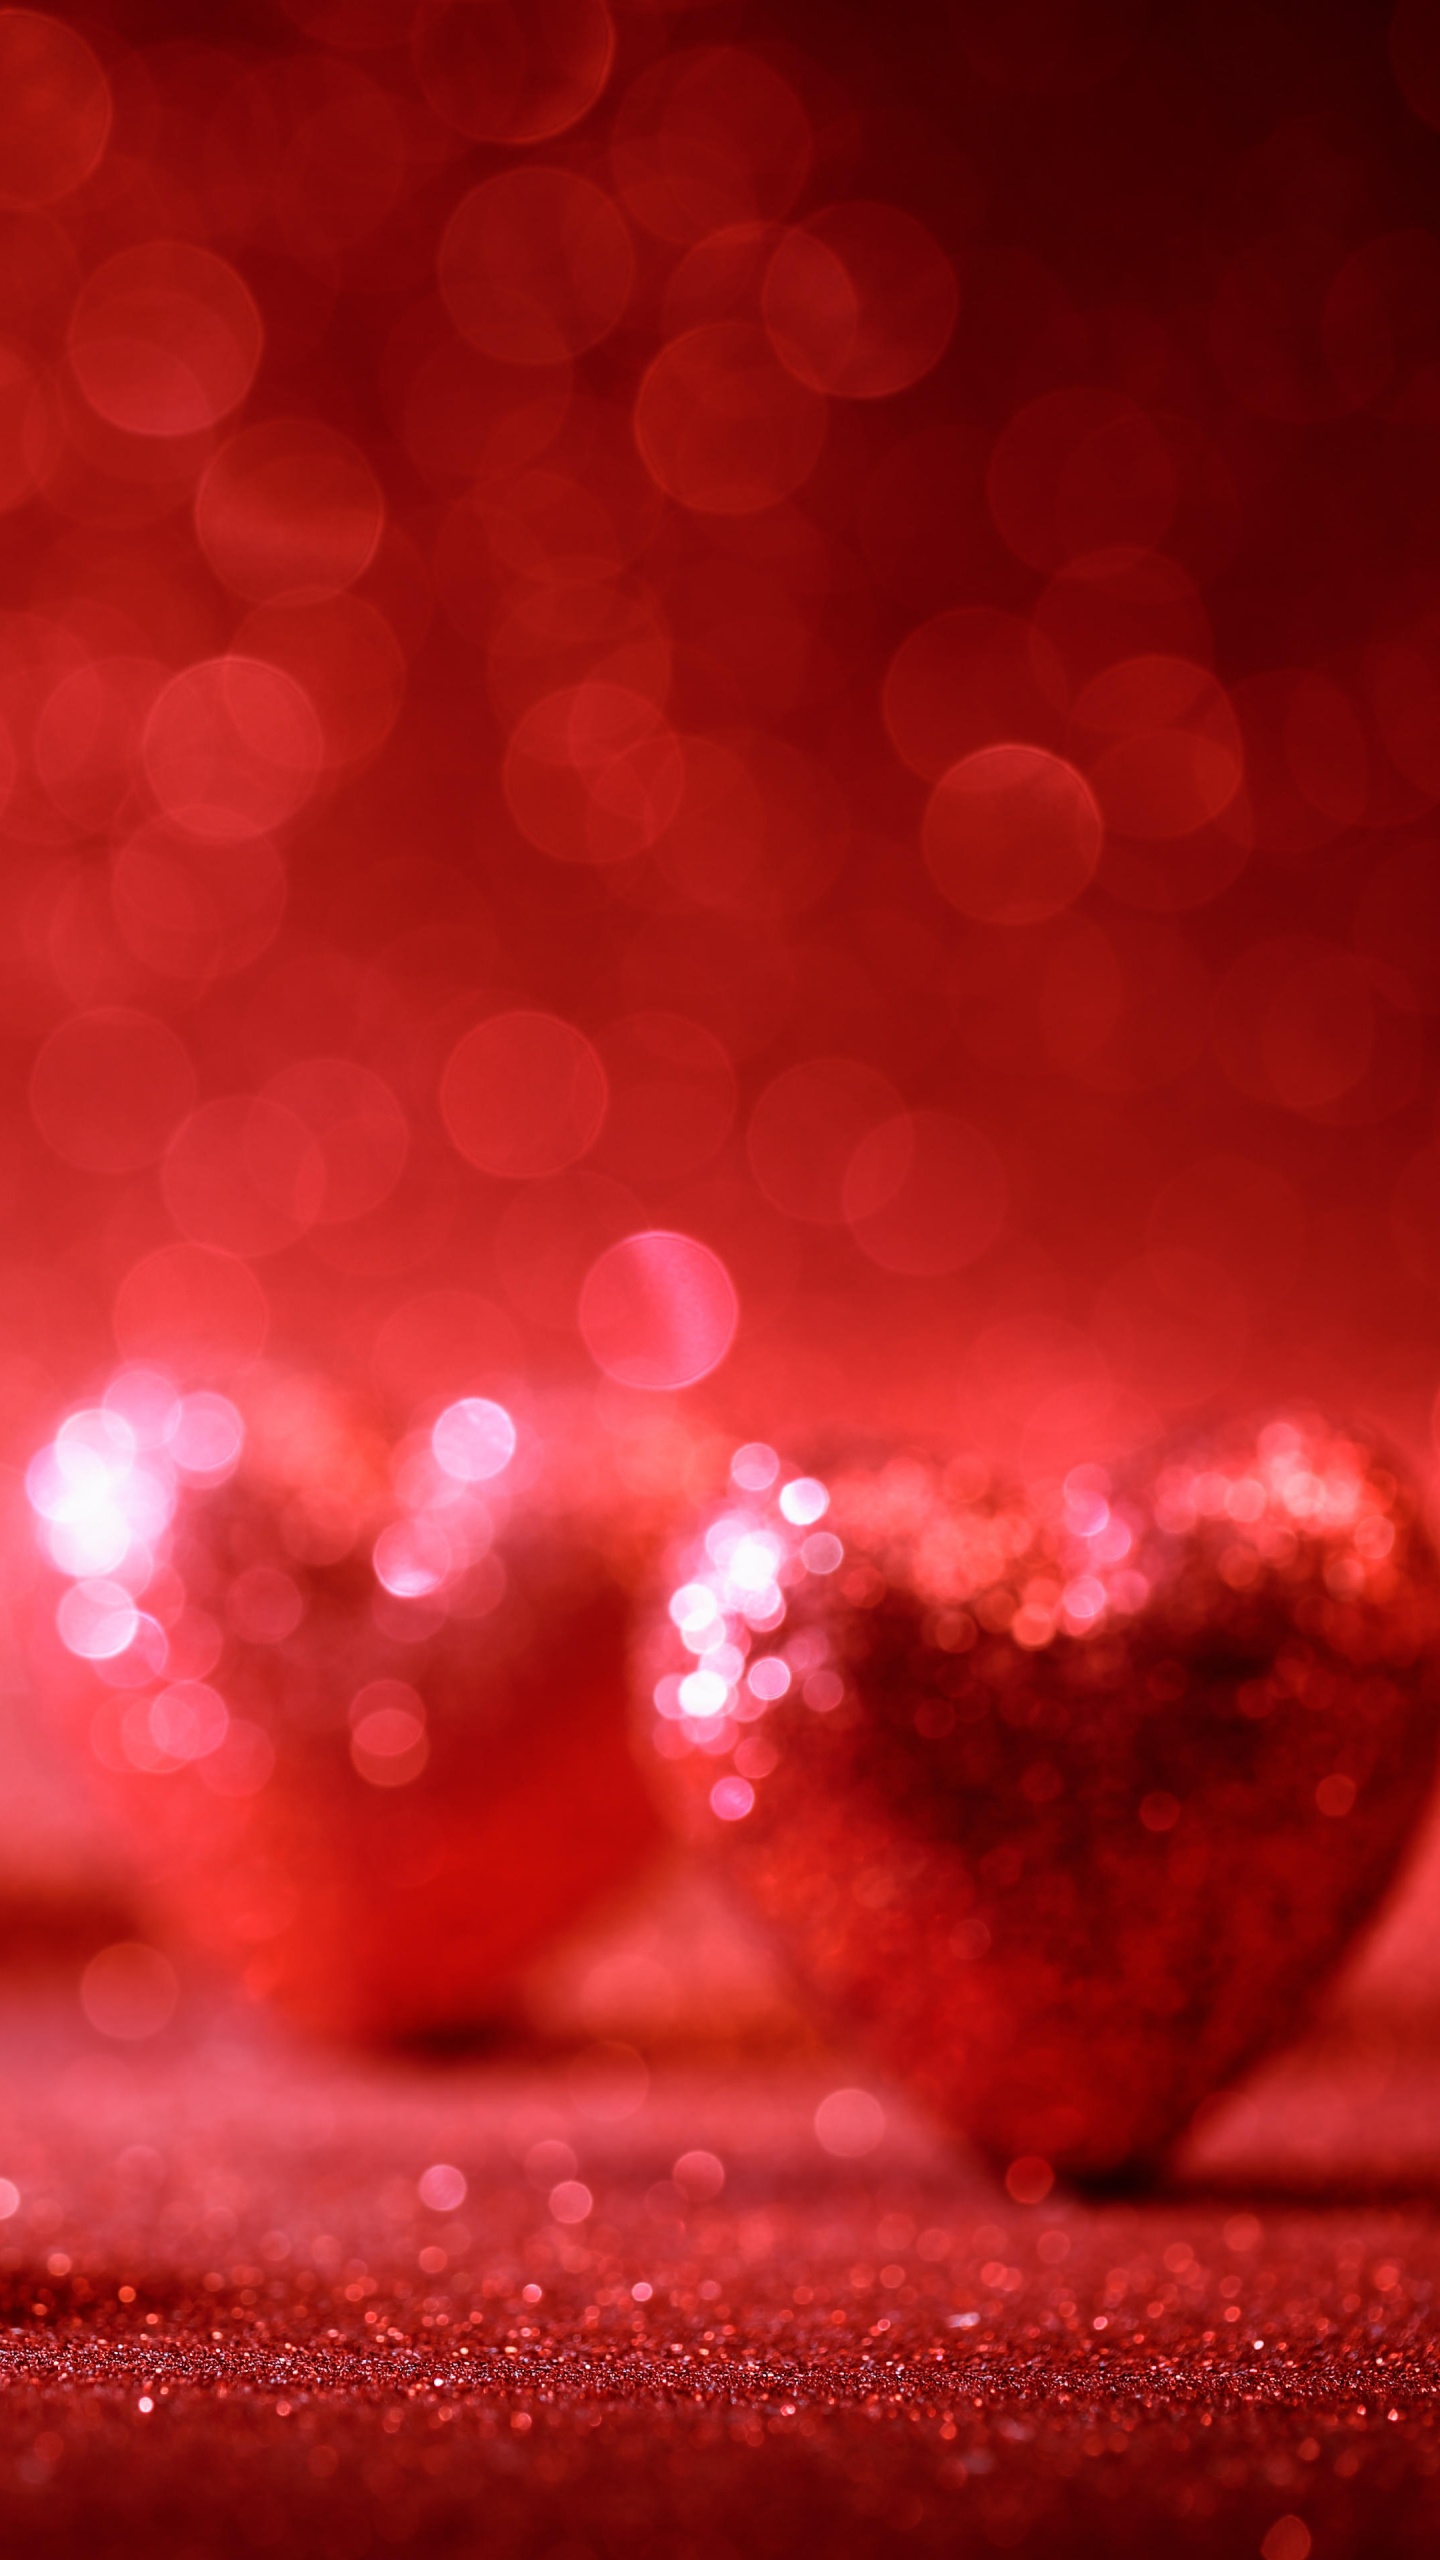 Valentines Day, Heart, Red, Love, Romance. Wallpaper in 1440x2560 Resolution